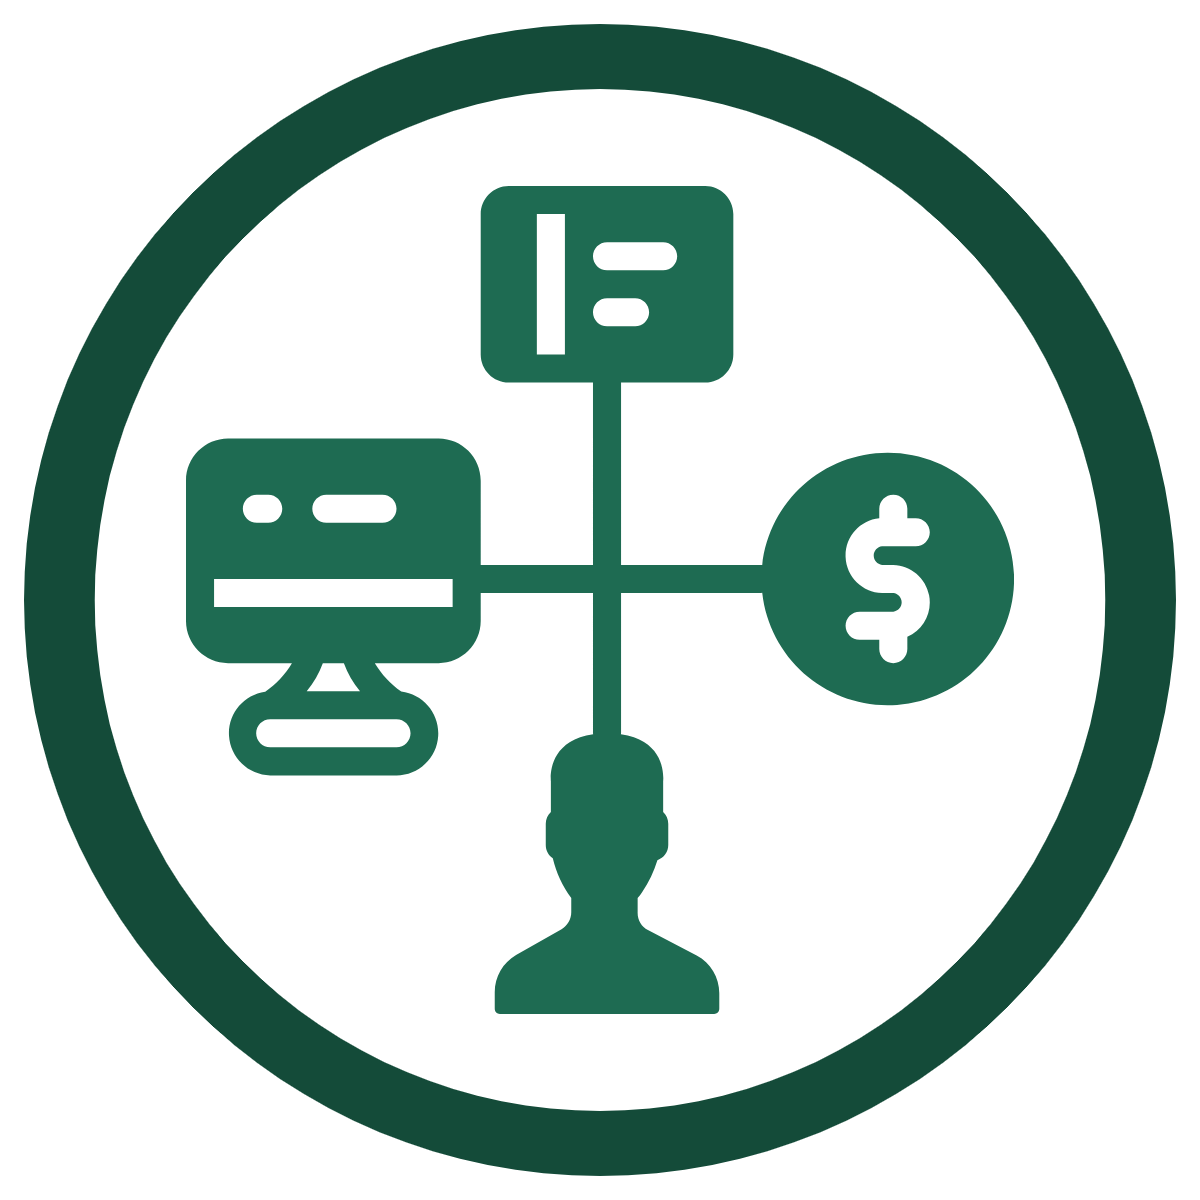 Silhouette of a man with lines pointing to three icons, computer, credit card, and a monetary coin - Resources